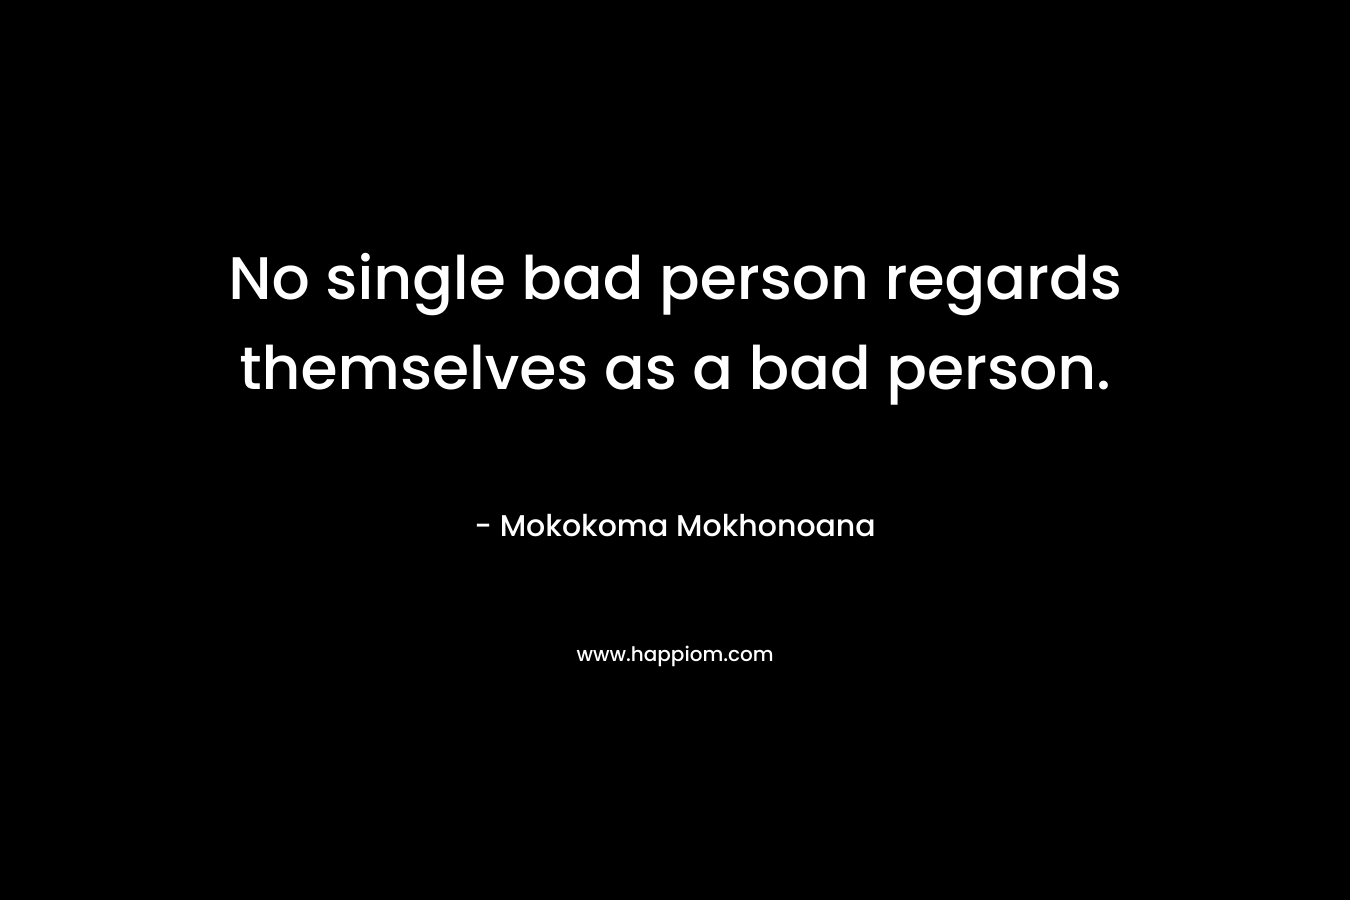 No single bad person regards themselves as a bad person.